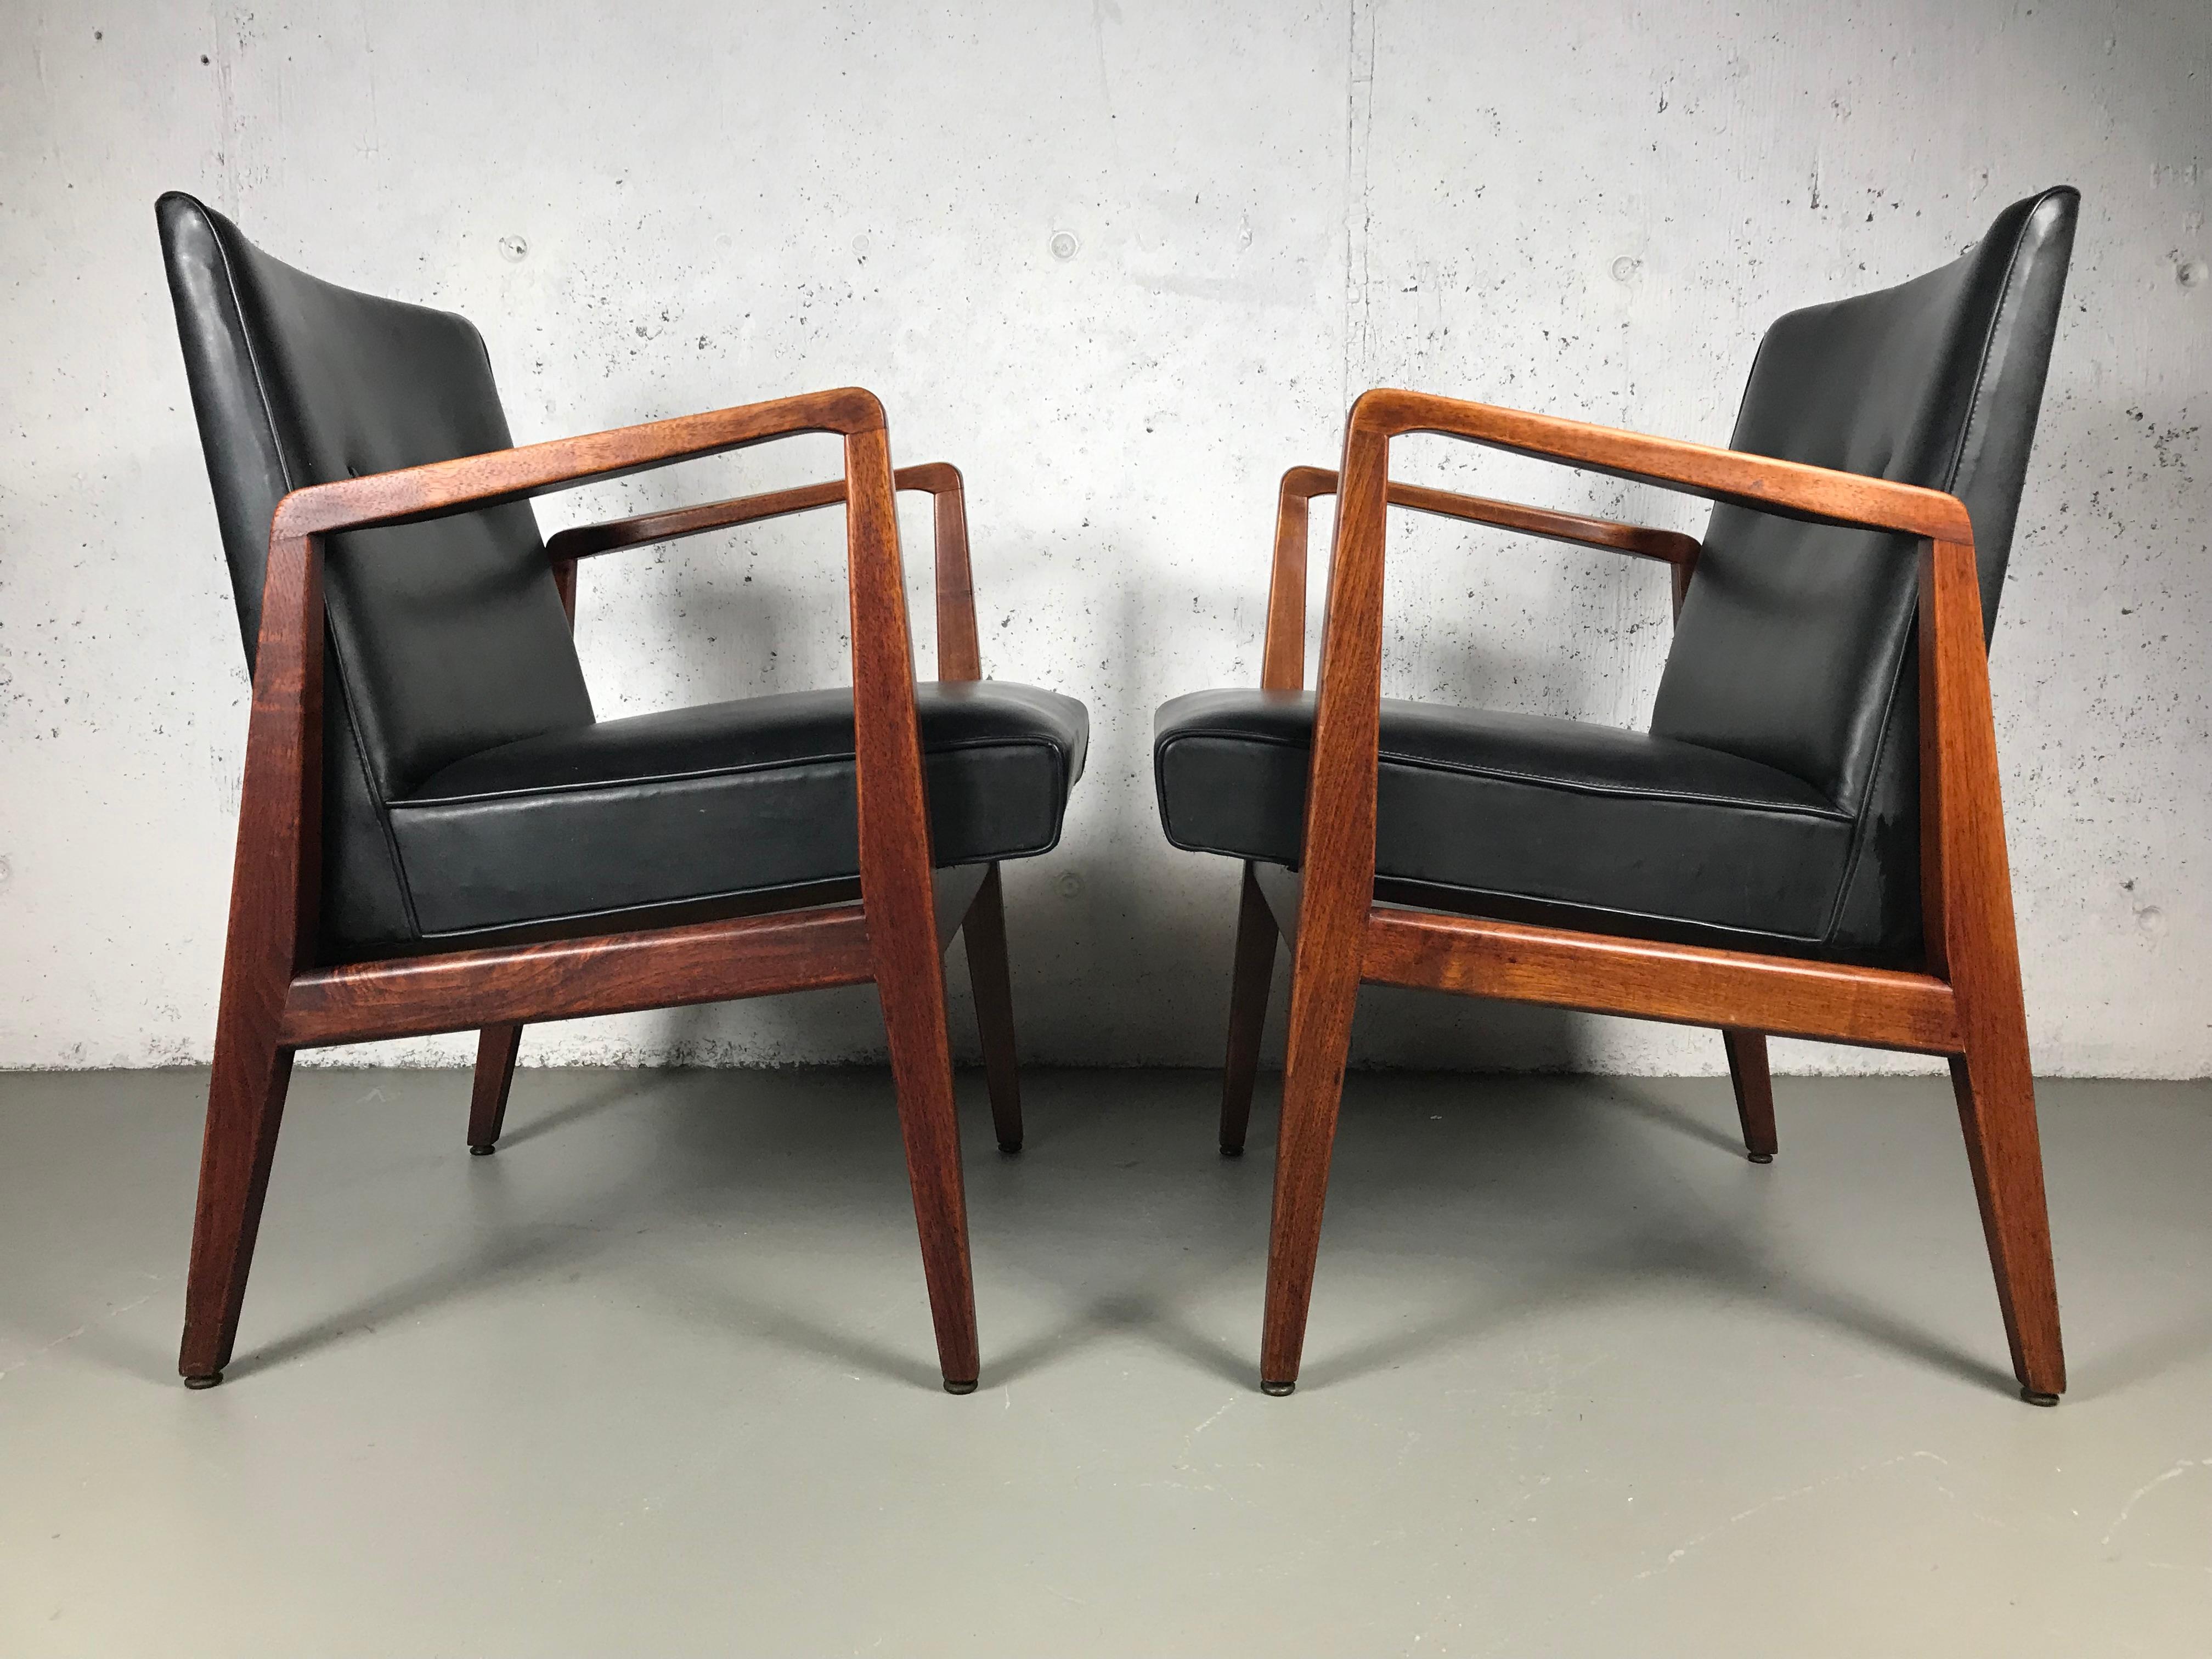 Pair of Occasional Lounge Chairs by Jens Risom Walnut and Black Vinyl Original 1